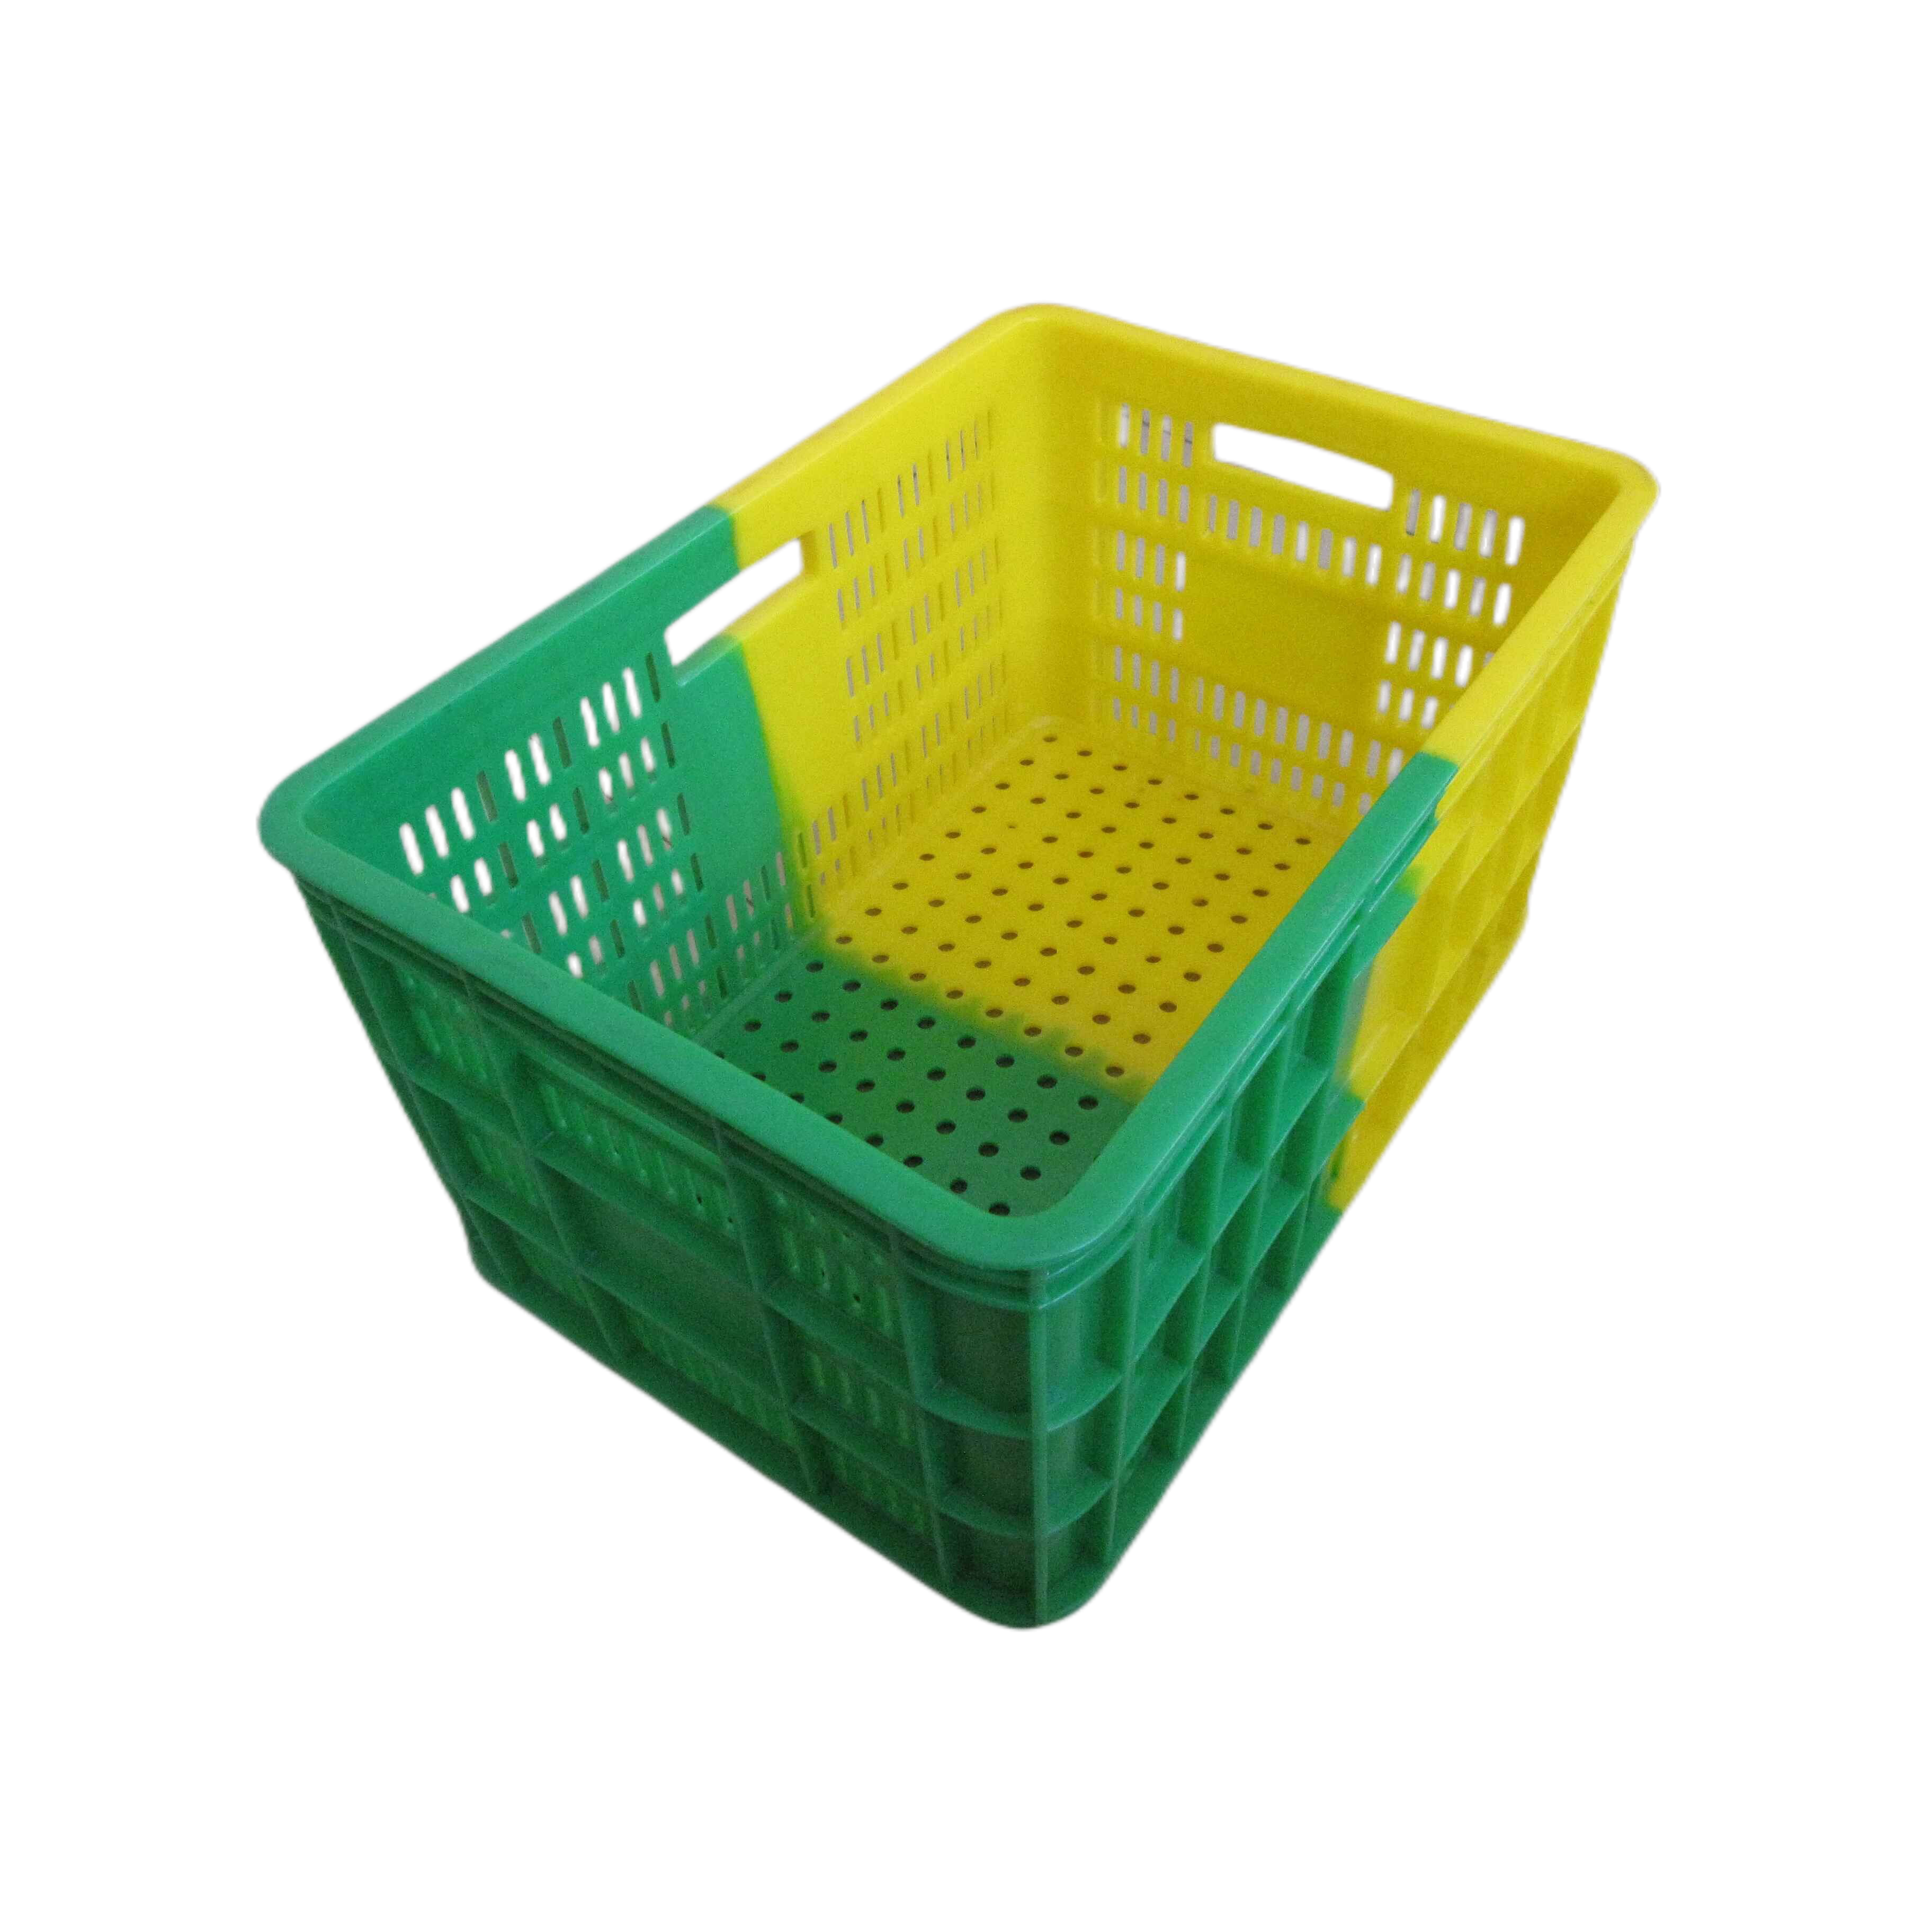 High-quality Plastic Turnover Basket Plastic Mould/daily product plastic Injection mould /Chinese plastic mould Manufacture/Supplier